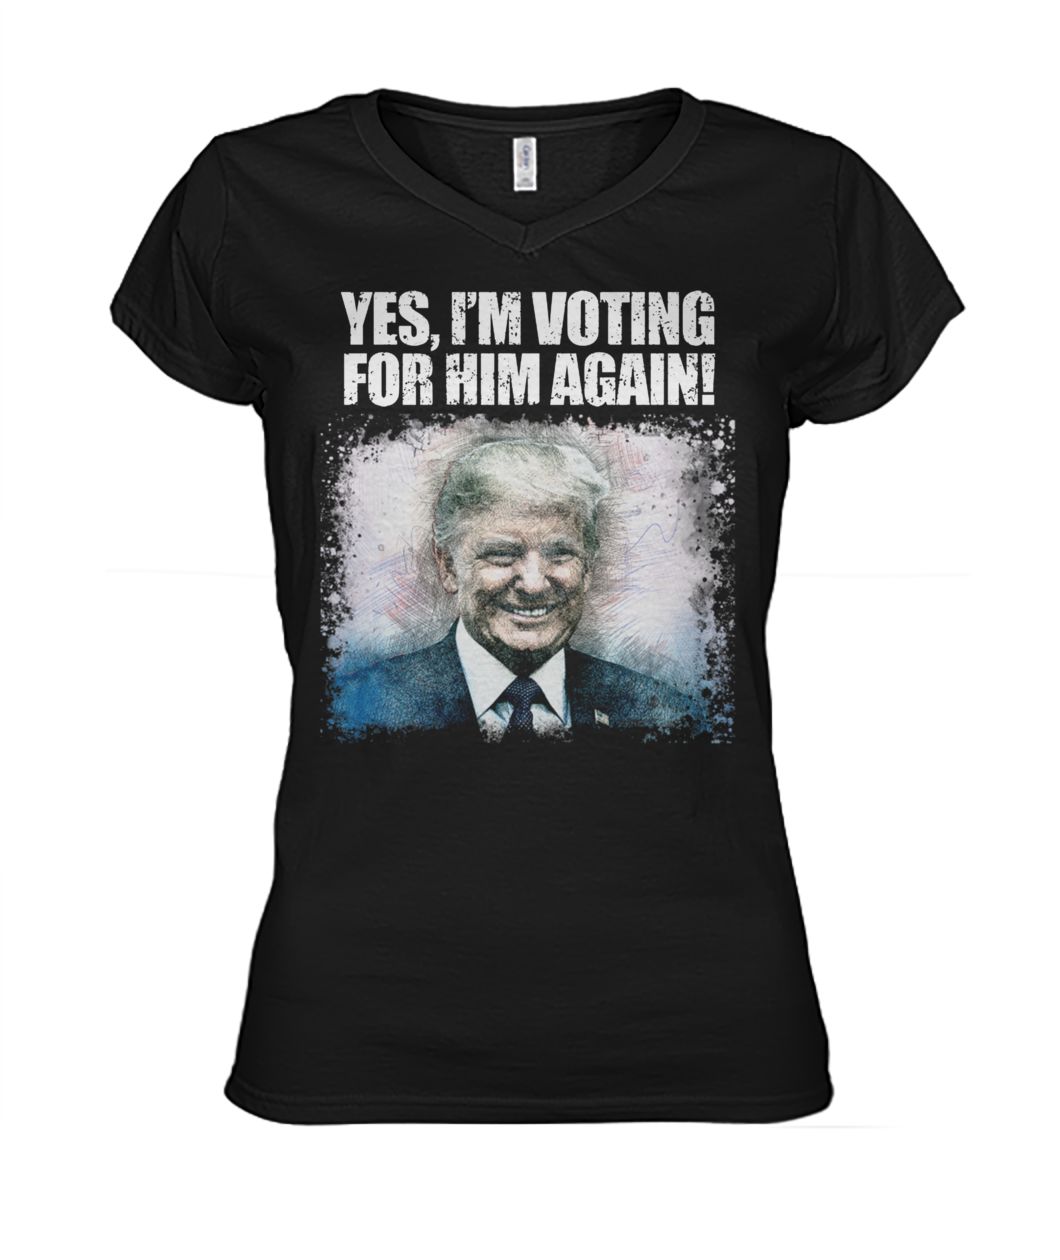 Donald trump yes I'm voting for him again women's v-neck